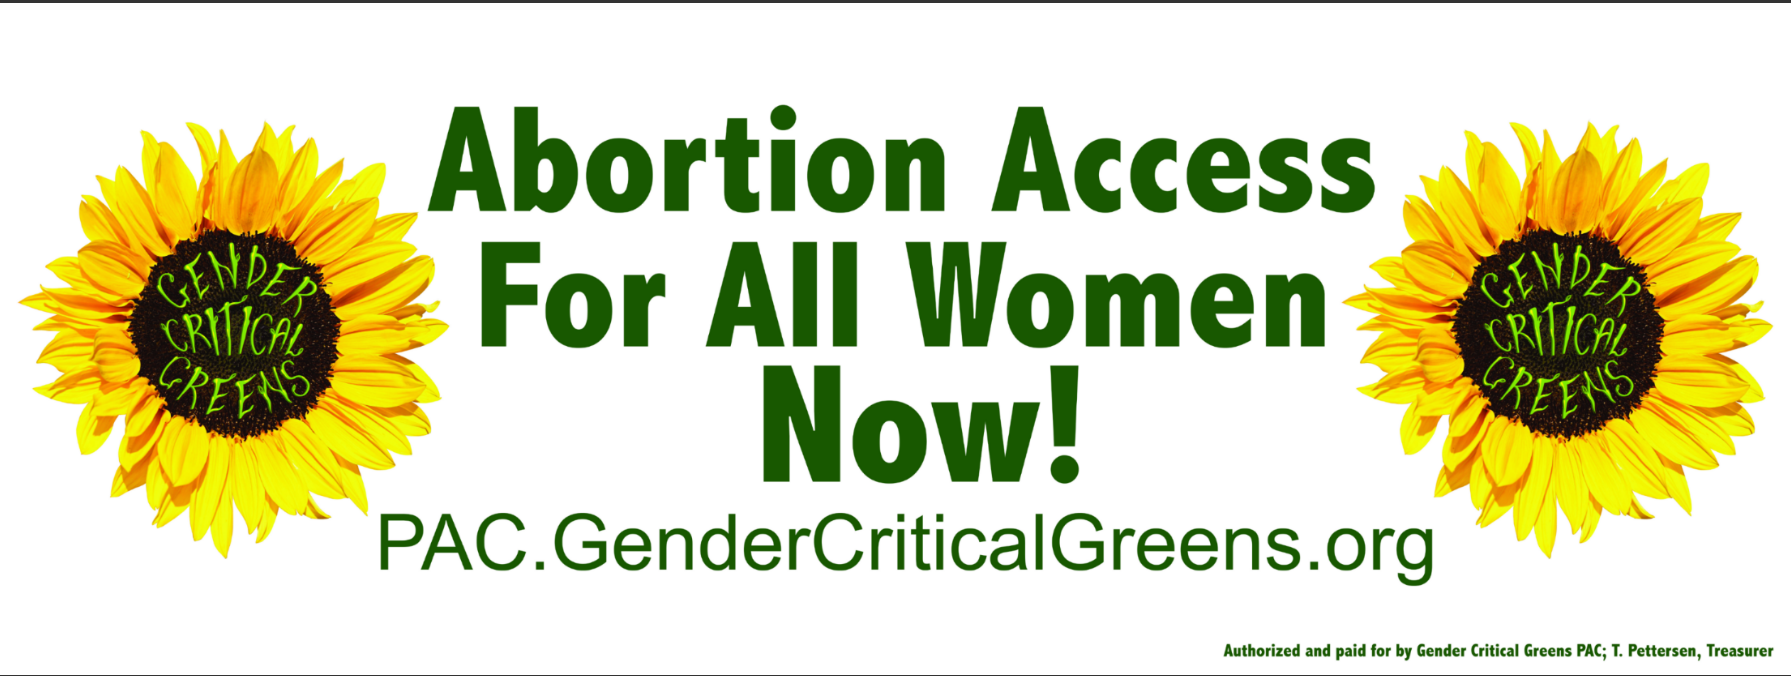 Abortion Access for All Women Now!